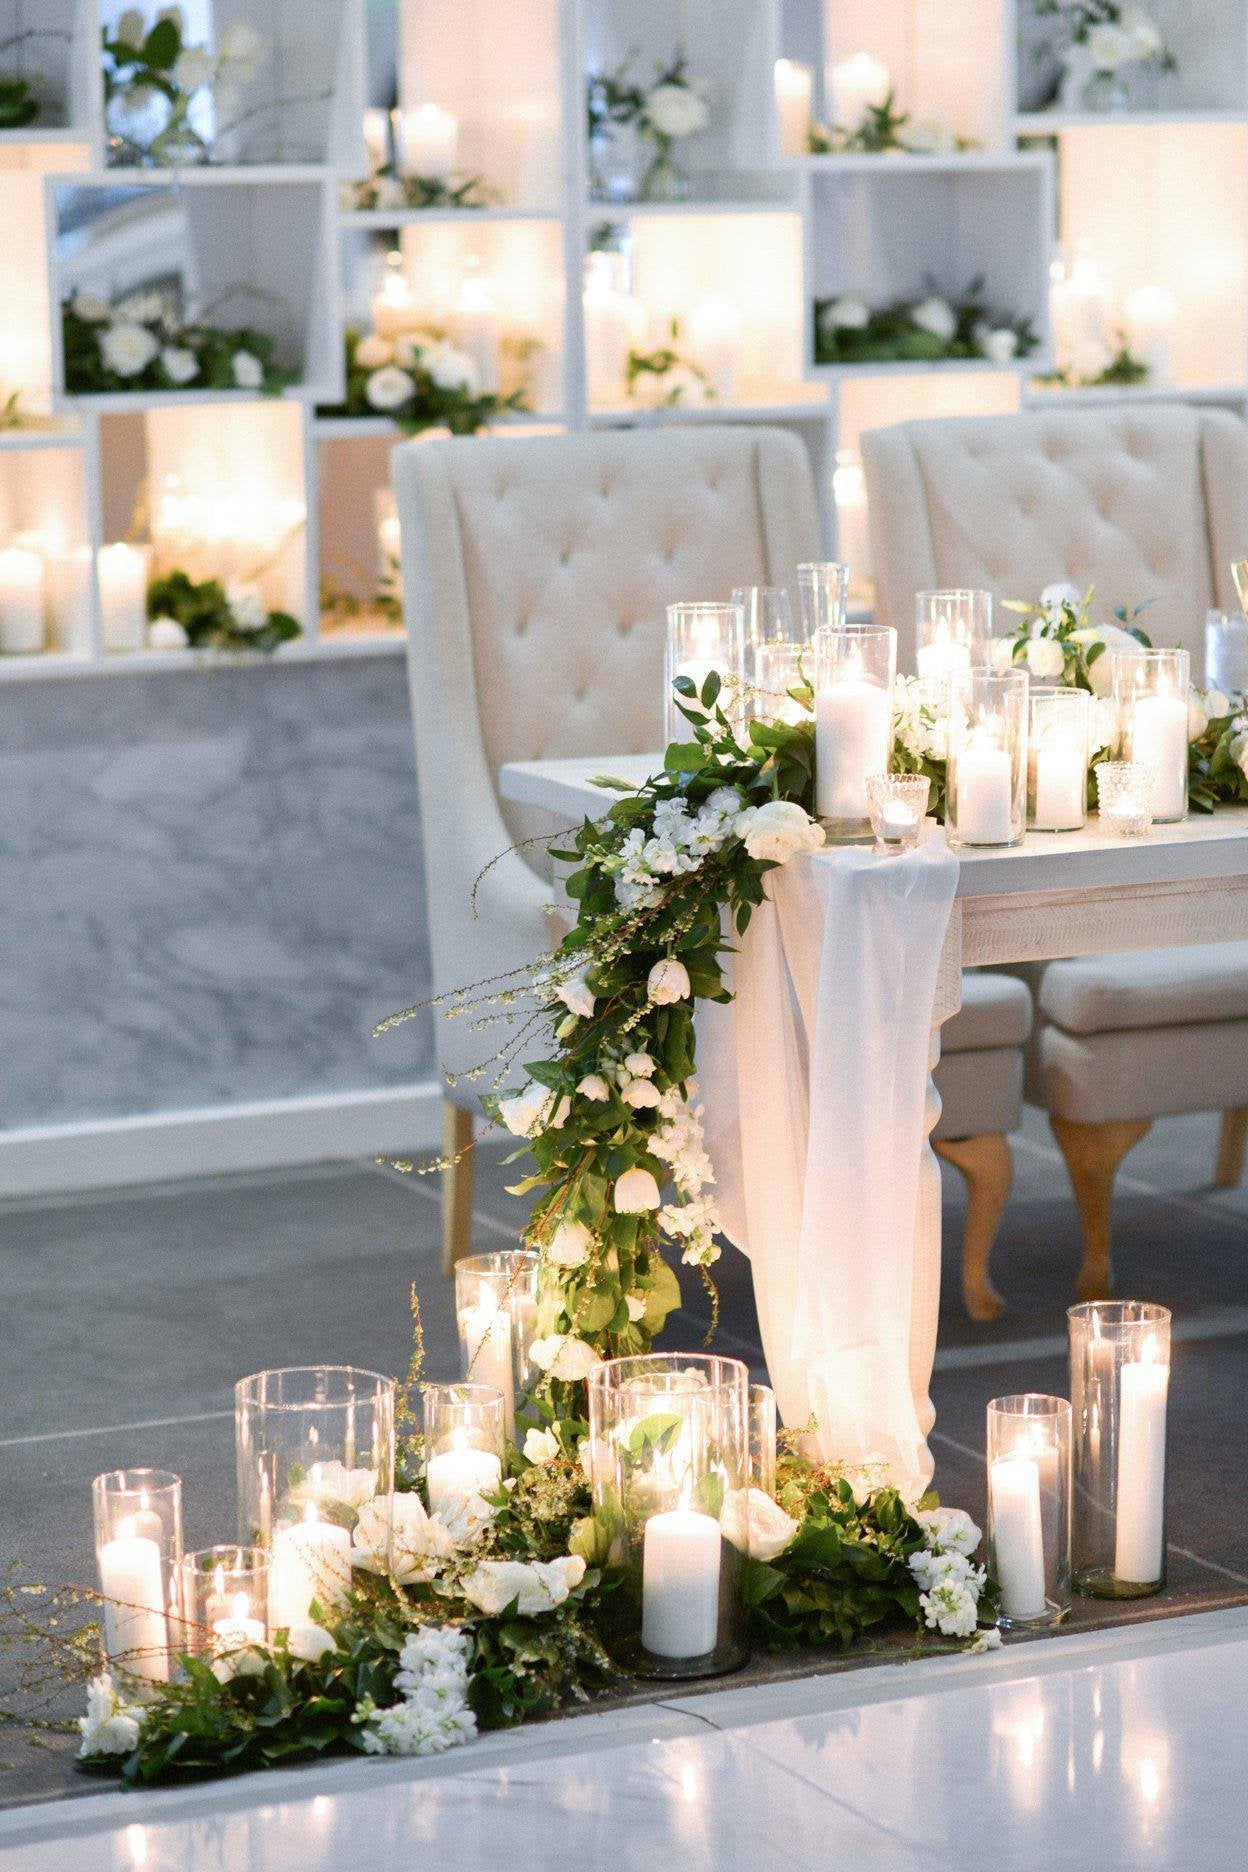 2021 Wedding Décor Trends (Centerpiece Ideas From The Experts)